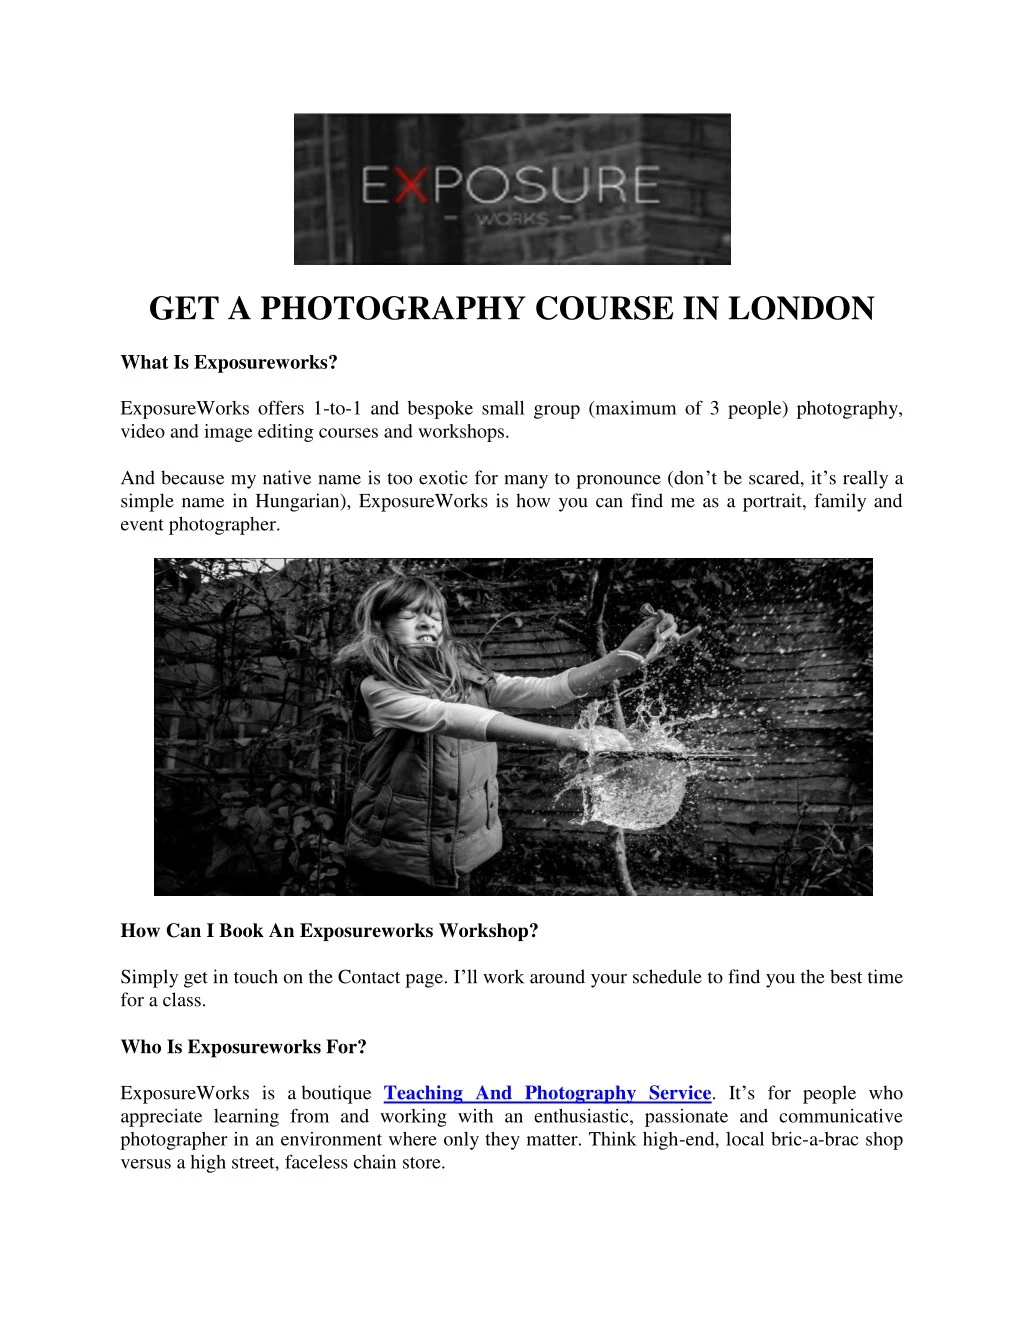 get a photography course in london